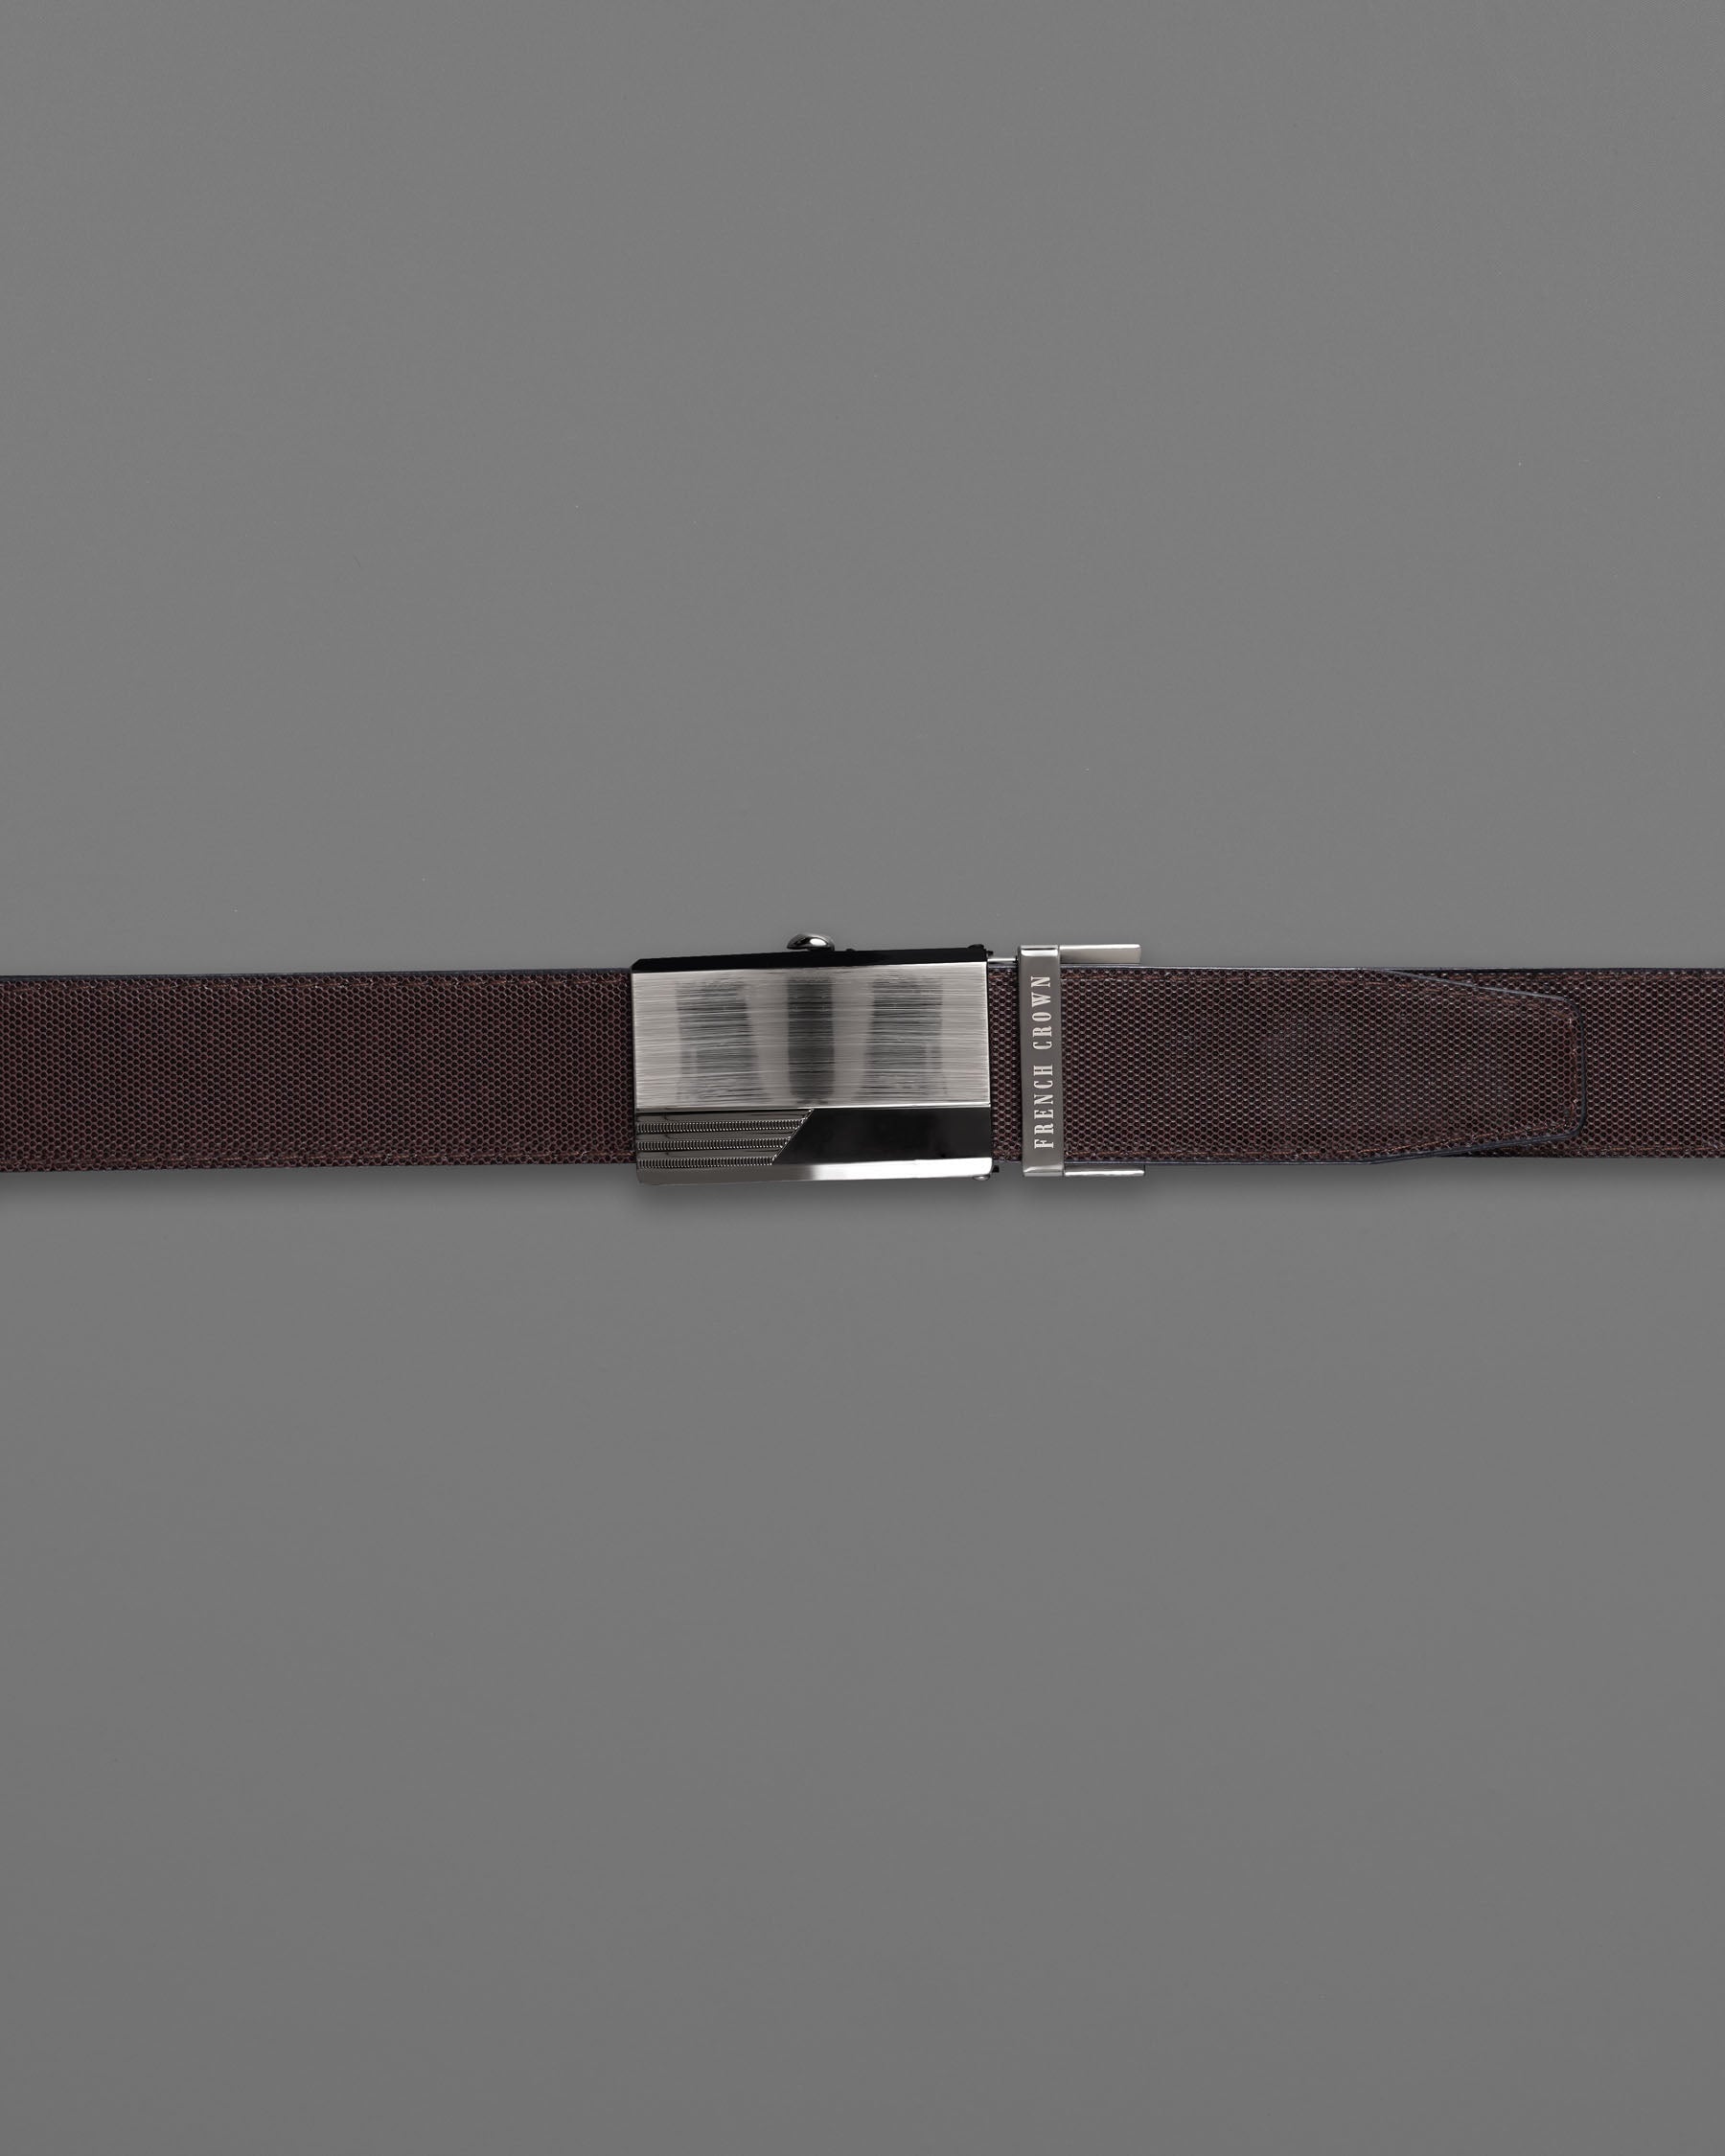 Silver Metallic with Black Shiny Box Buckle with Jade Black and Brown Leather Free Handcrafted Reversible Belt BT073-28, BT073-30, BT073-32, BT073-34, BT073-36, BT073-38